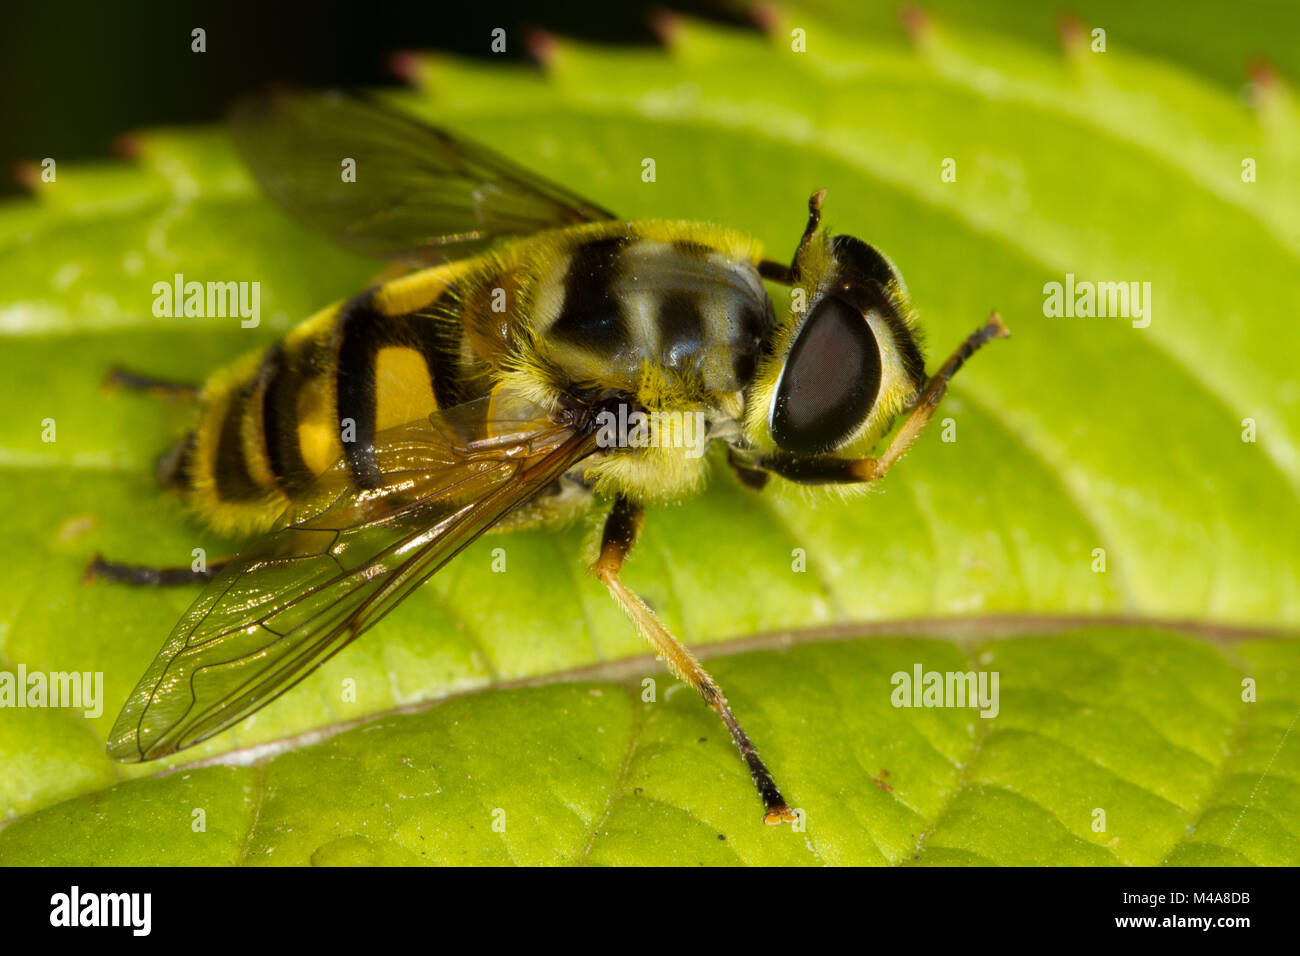 Myathropa florea hoverfly cleaning its eyes with its forelegs Stock Photo